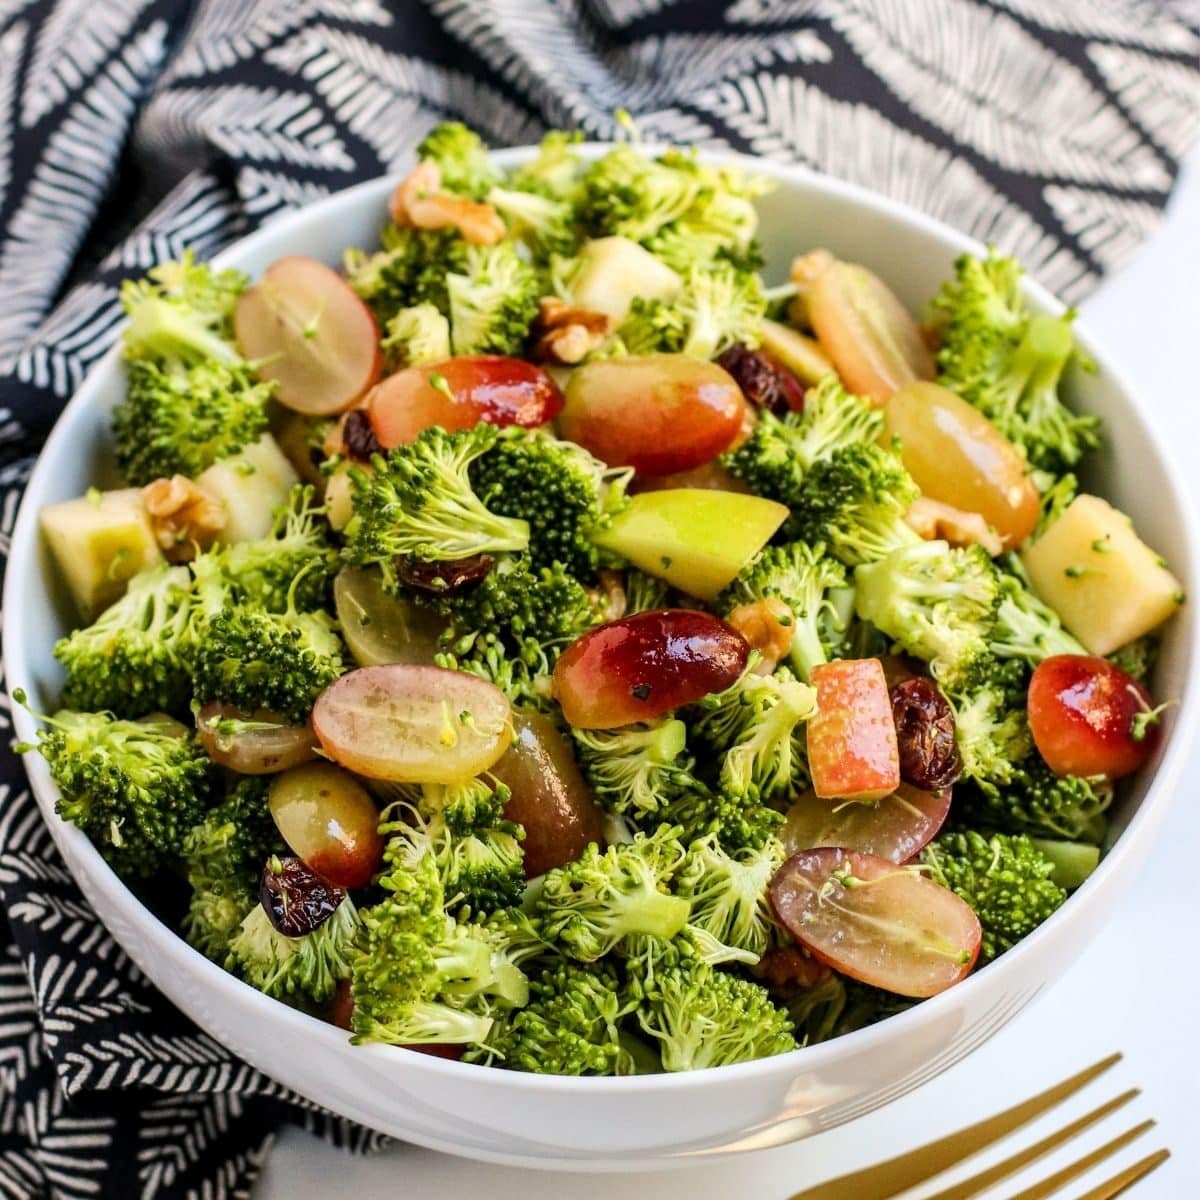 Bowl of broccoli salad with halved grapes and diced apples.